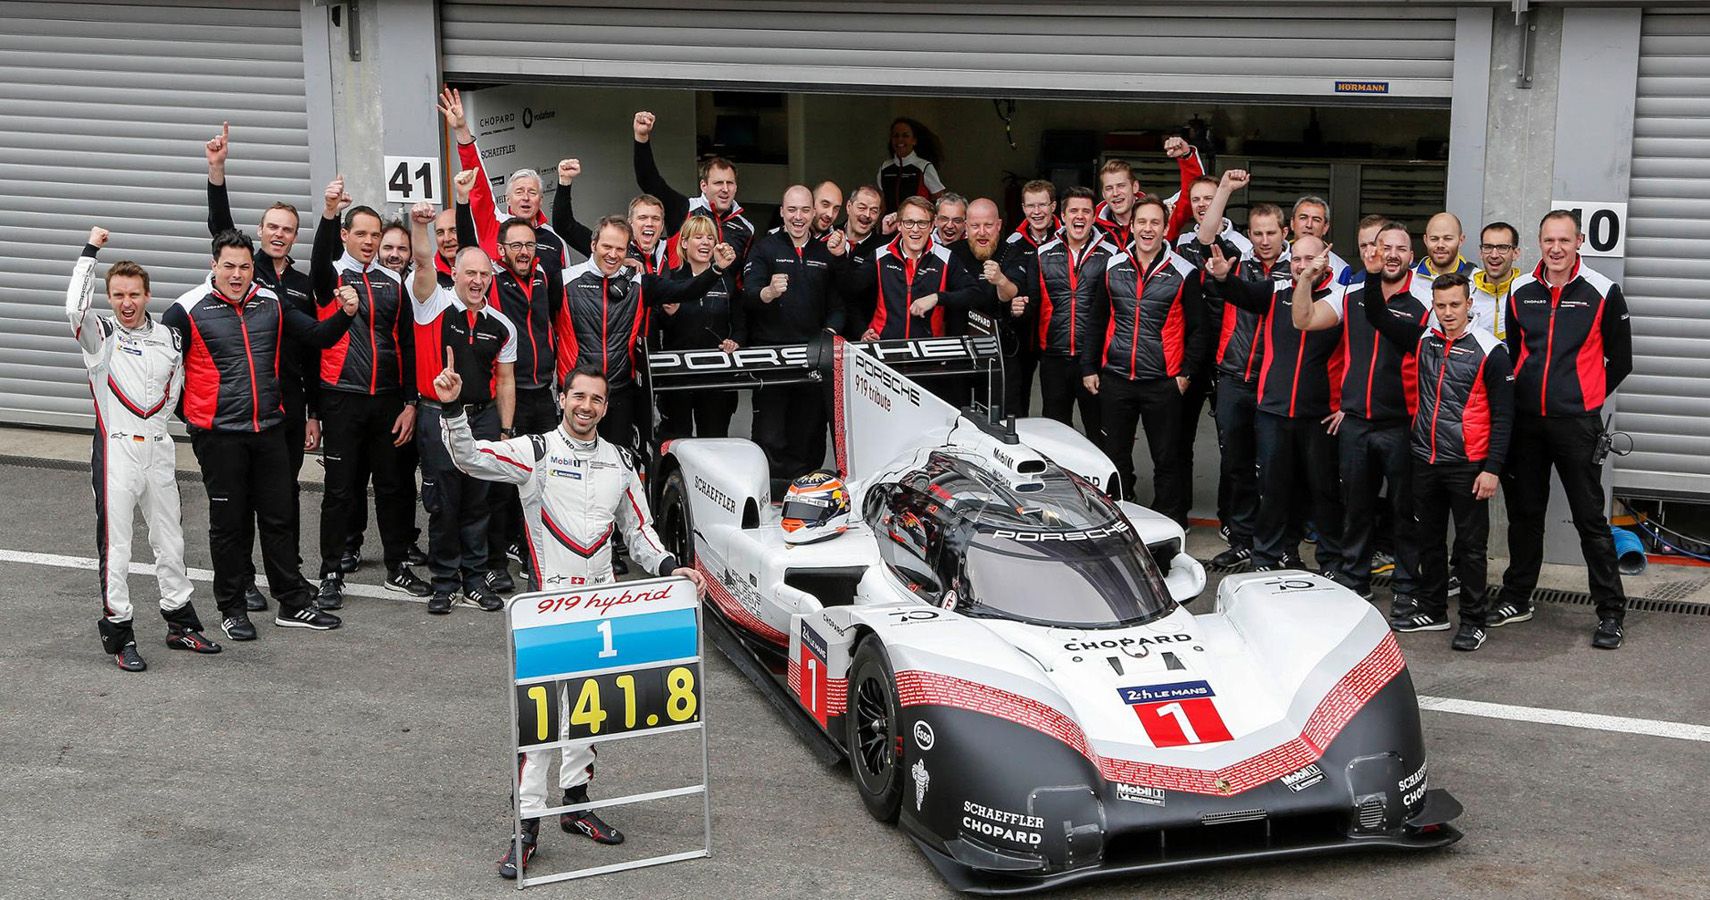 This Is How The Porsche 919 EVO's Top Speed Compares To Formula 1 Cars